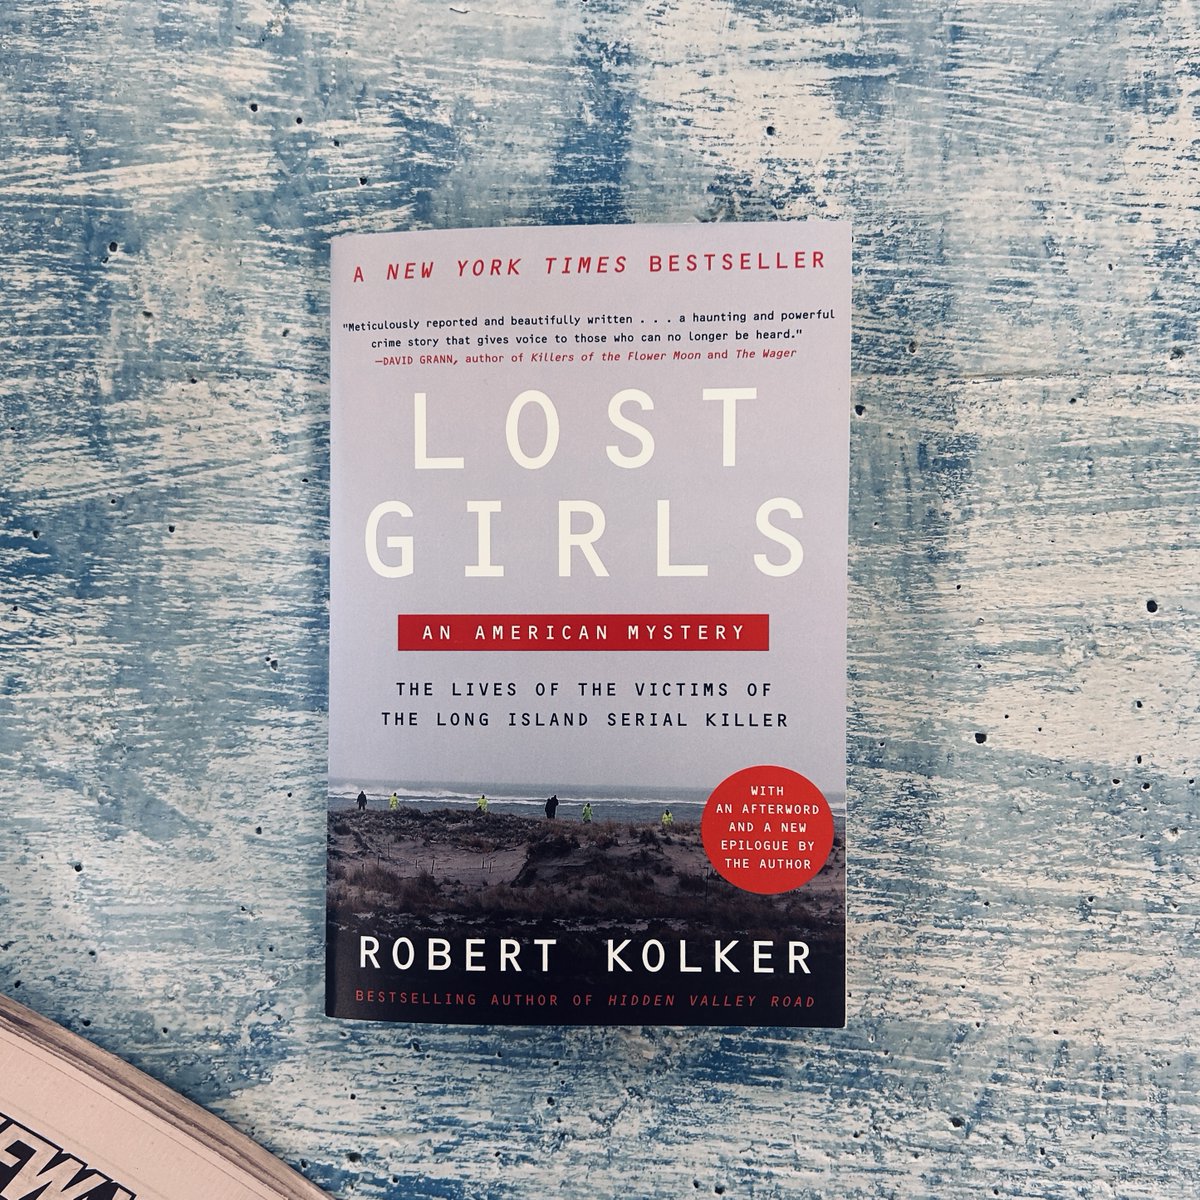 NEW EDITION! Now that the Long Island serial killer has been caught, this reissue includes an epilogue with details on the long-awaited arrest, an expanded timeline to guide readers through all the cases, and an afterward about Mari Gilbert, one of the victim's mothers.